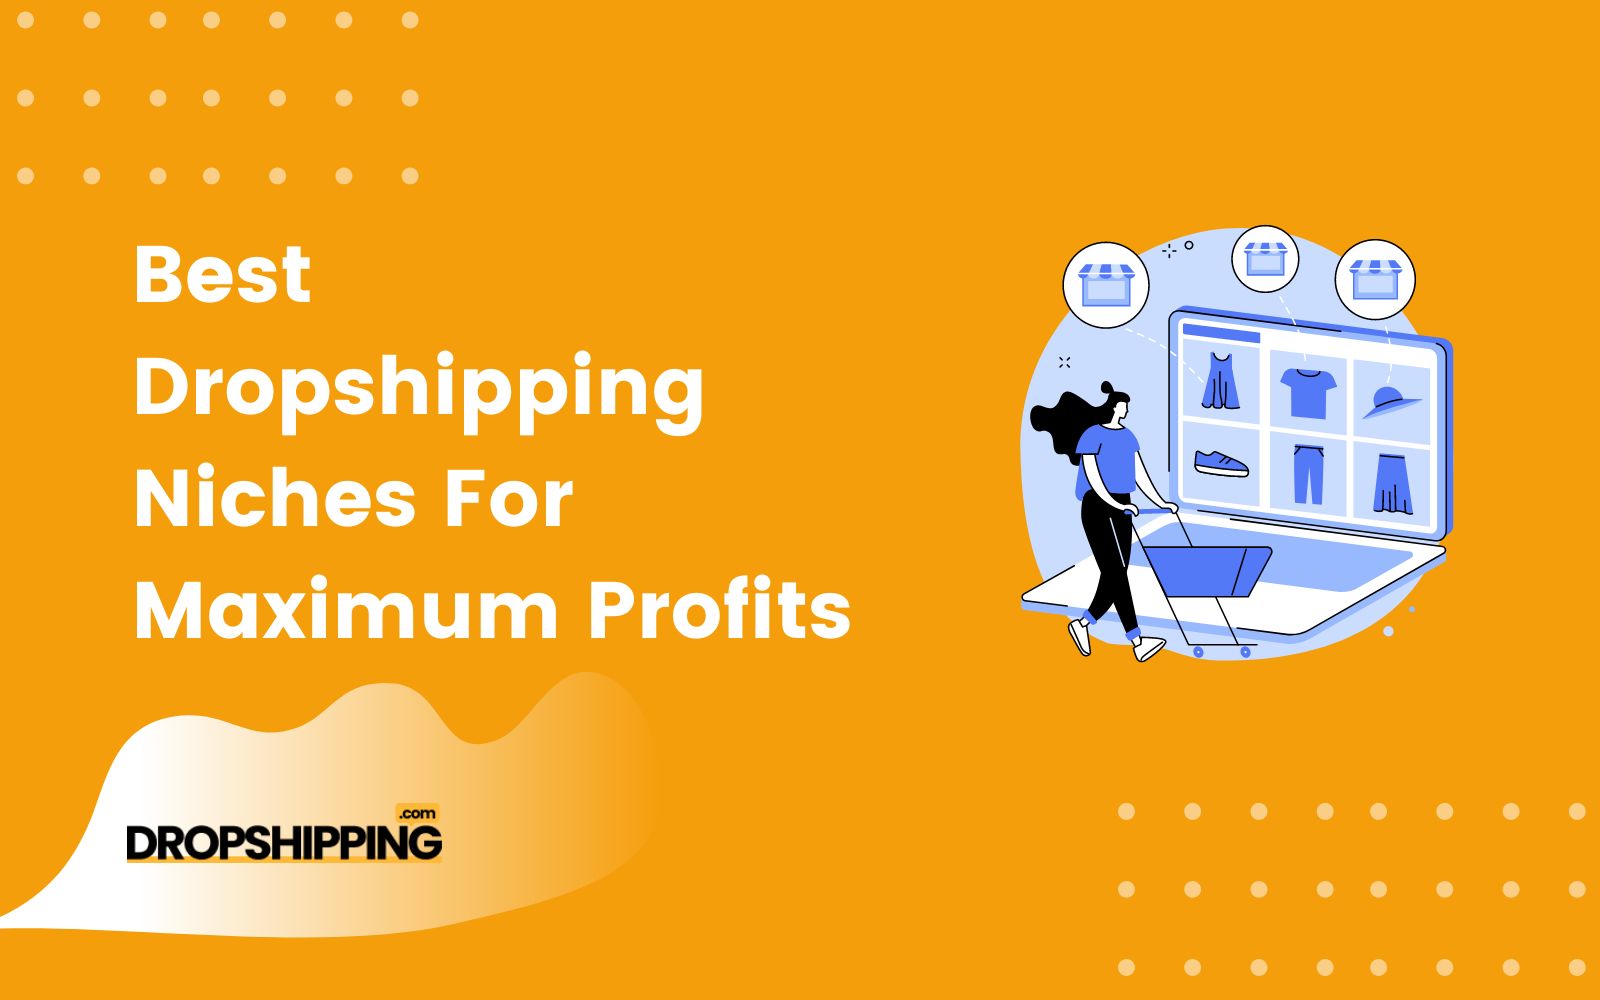 How To Find The Best Dropshipping Niche for Big Profits